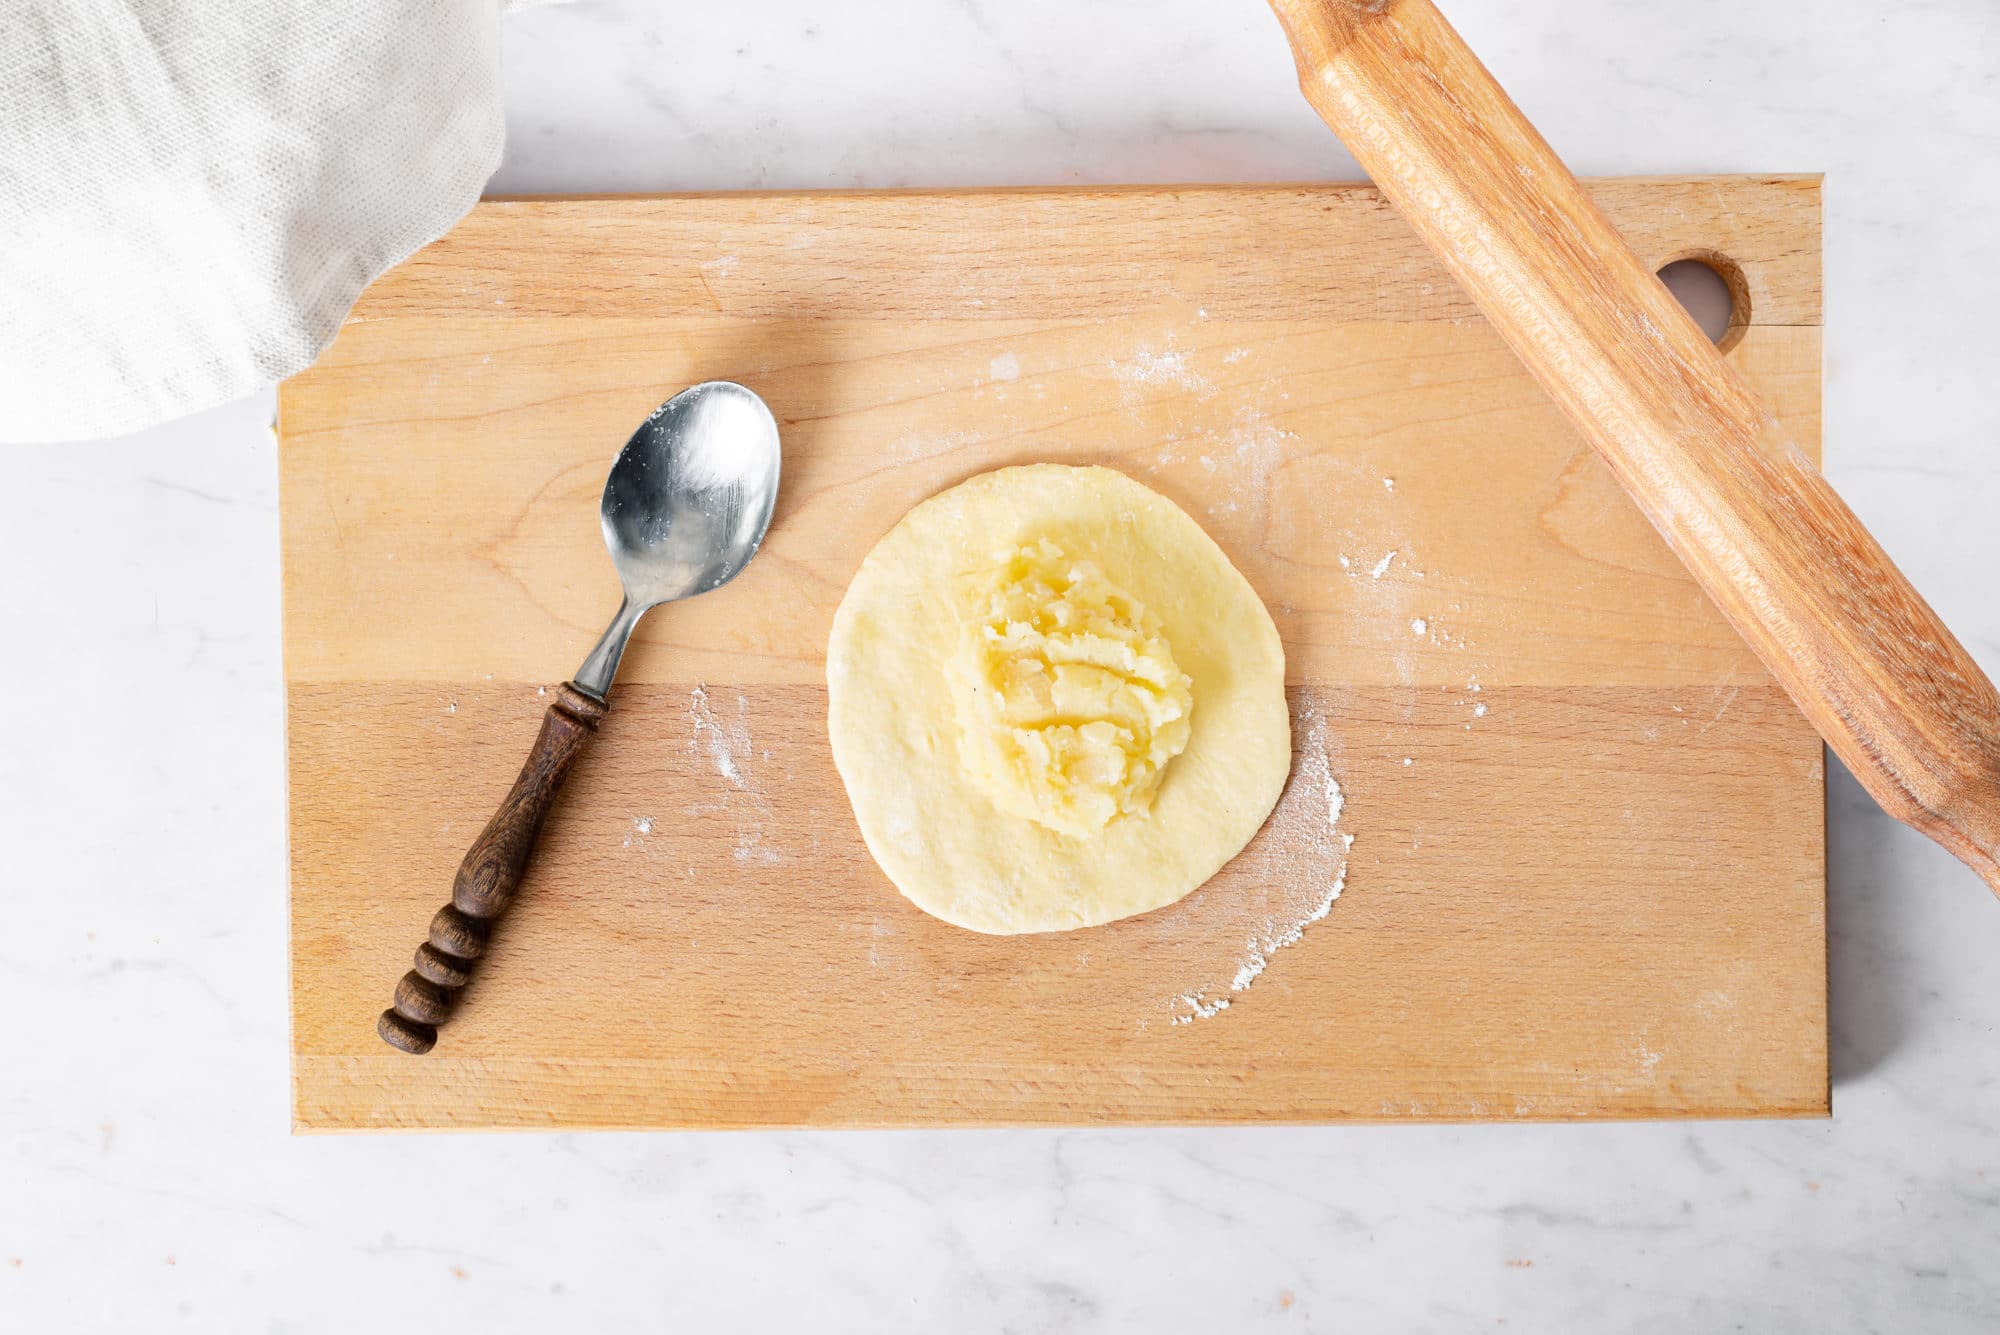 Rolled out dough on a wooden cutting board filled with mashed potato filling with a wooden rolling pin and a spoon on the side.